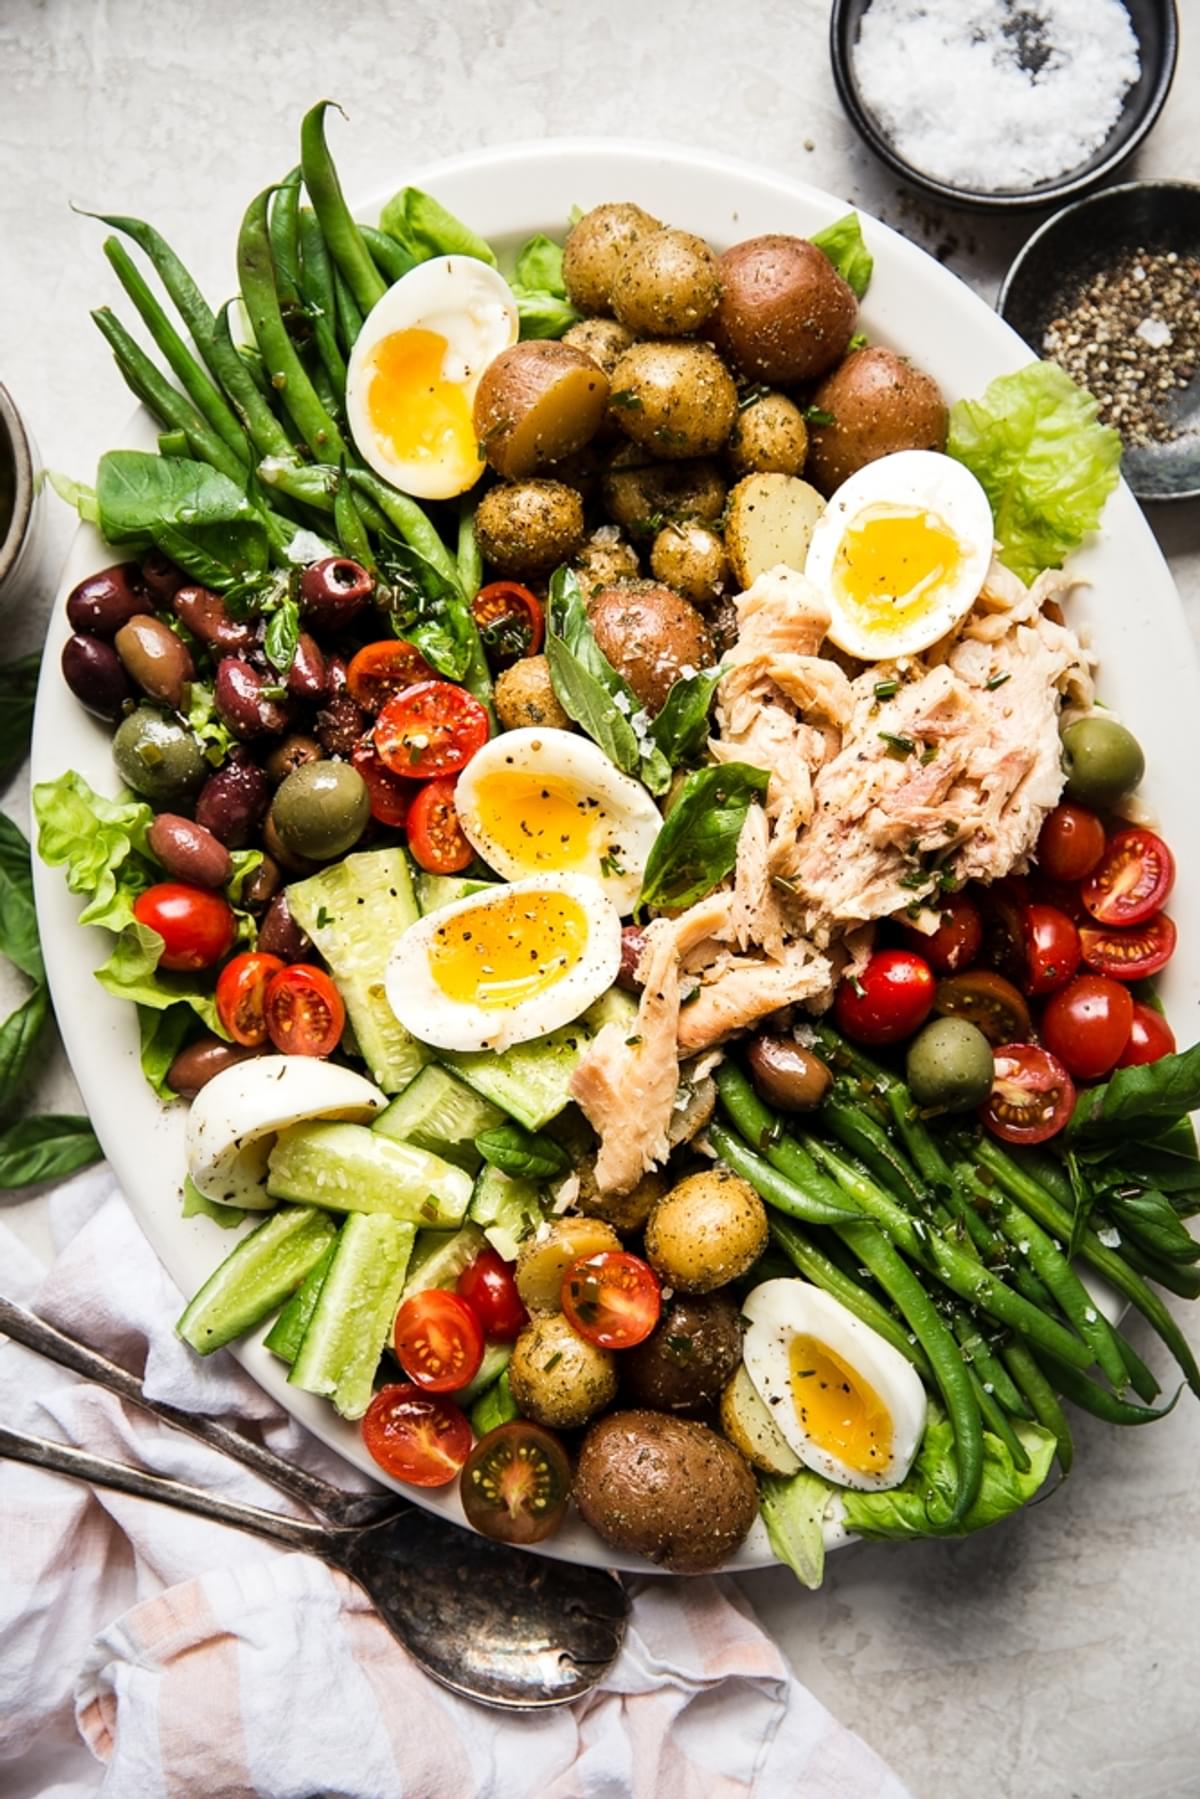 Easy Salad Niçoise with potatoes, cucumber, olives, green beans and smoked trout.